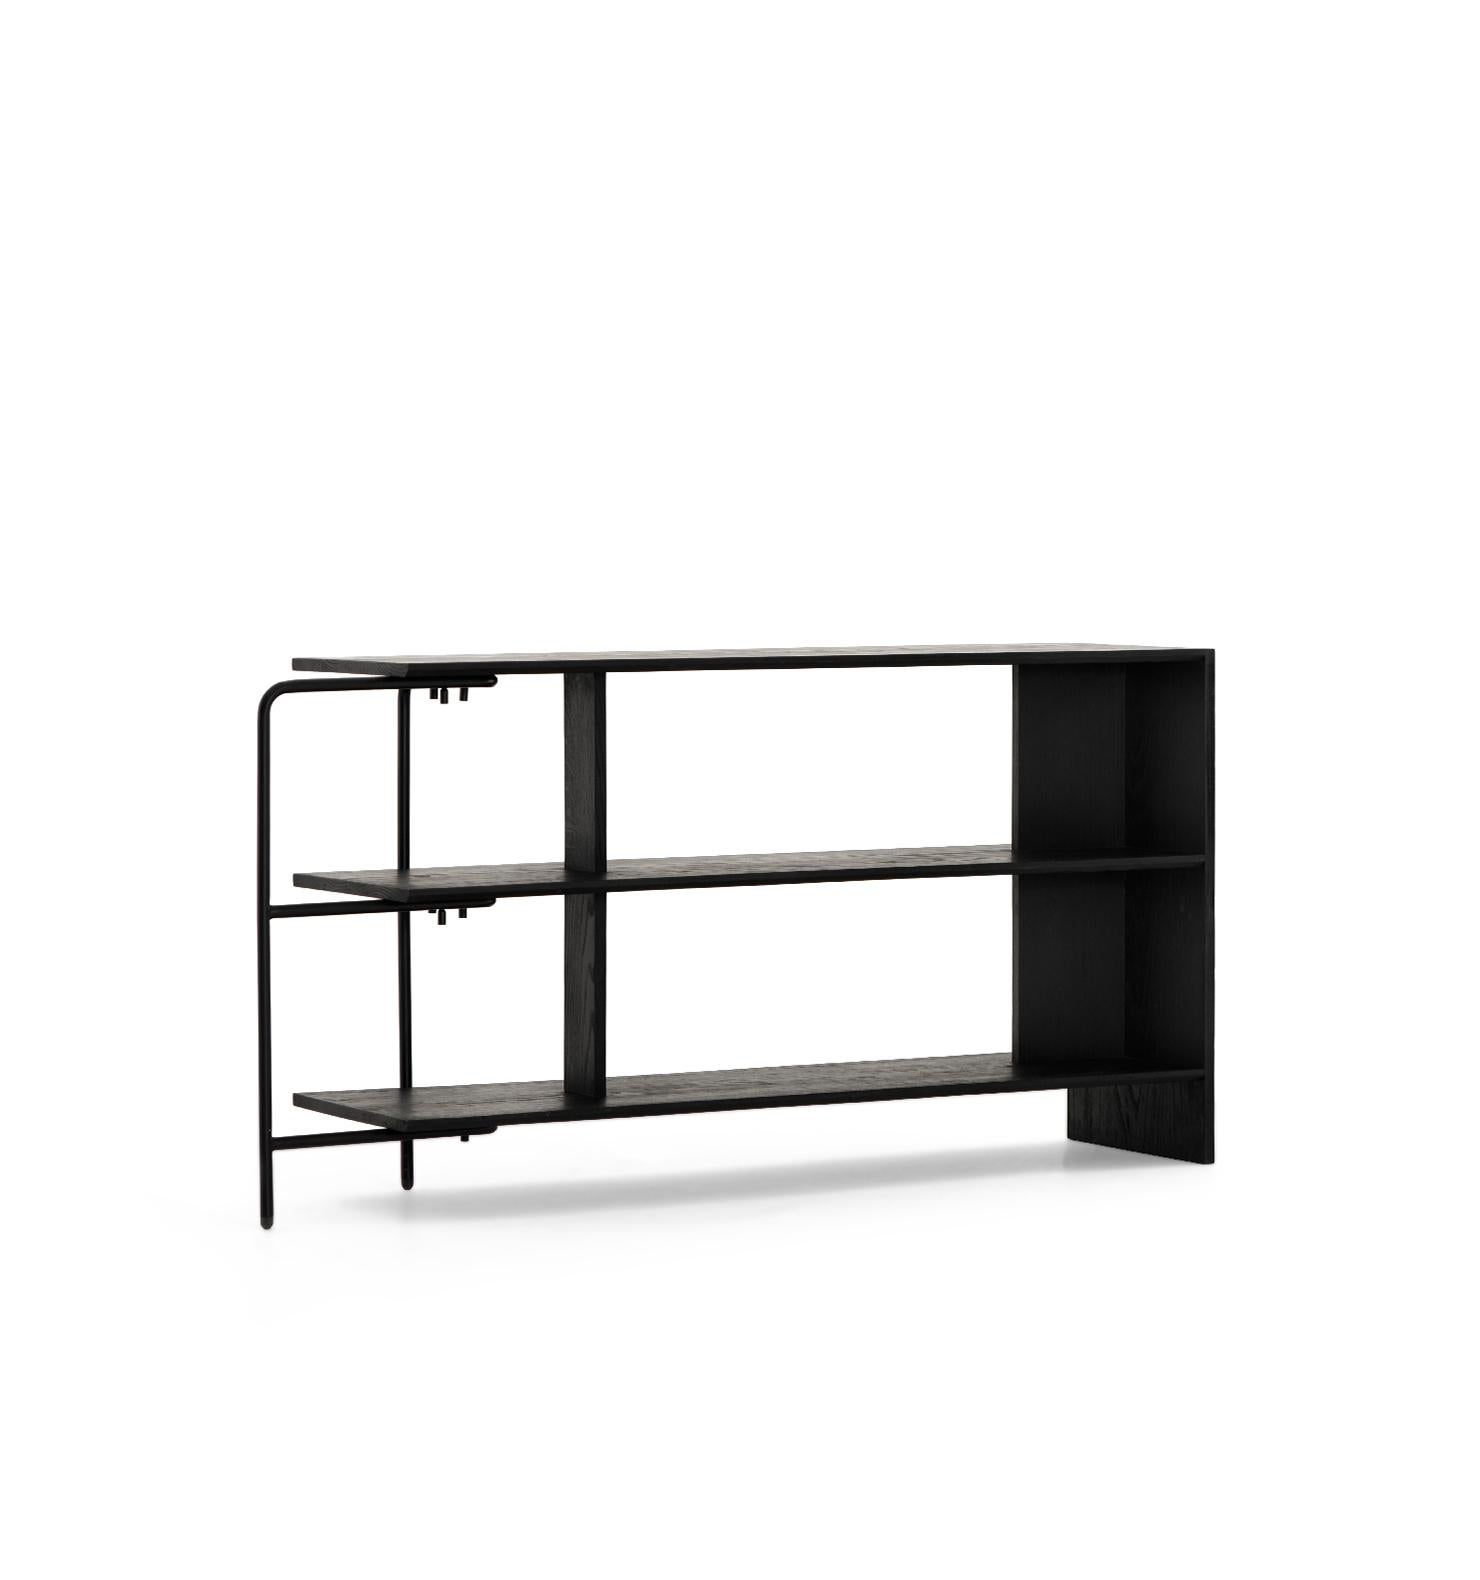 Hand-Crafted Librero DUNA, Mexican Contemporary bookcase by Emiliano Molina for CUCHARA For Sale